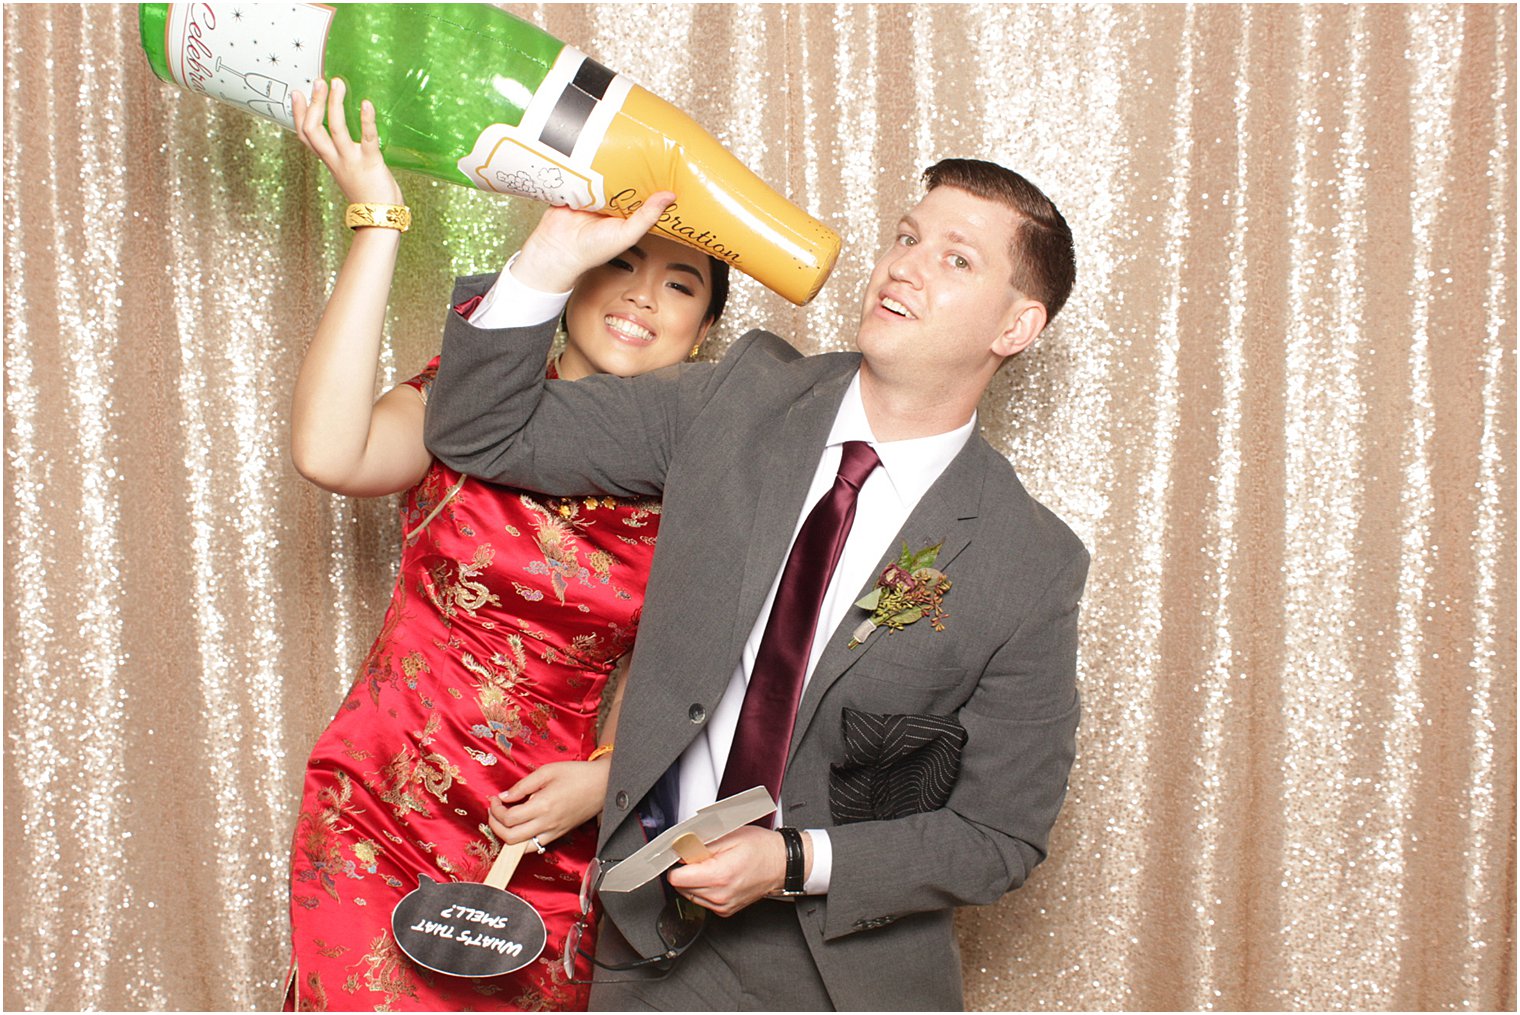 bride and groom pose in Park Chateau Estate Photo Booth